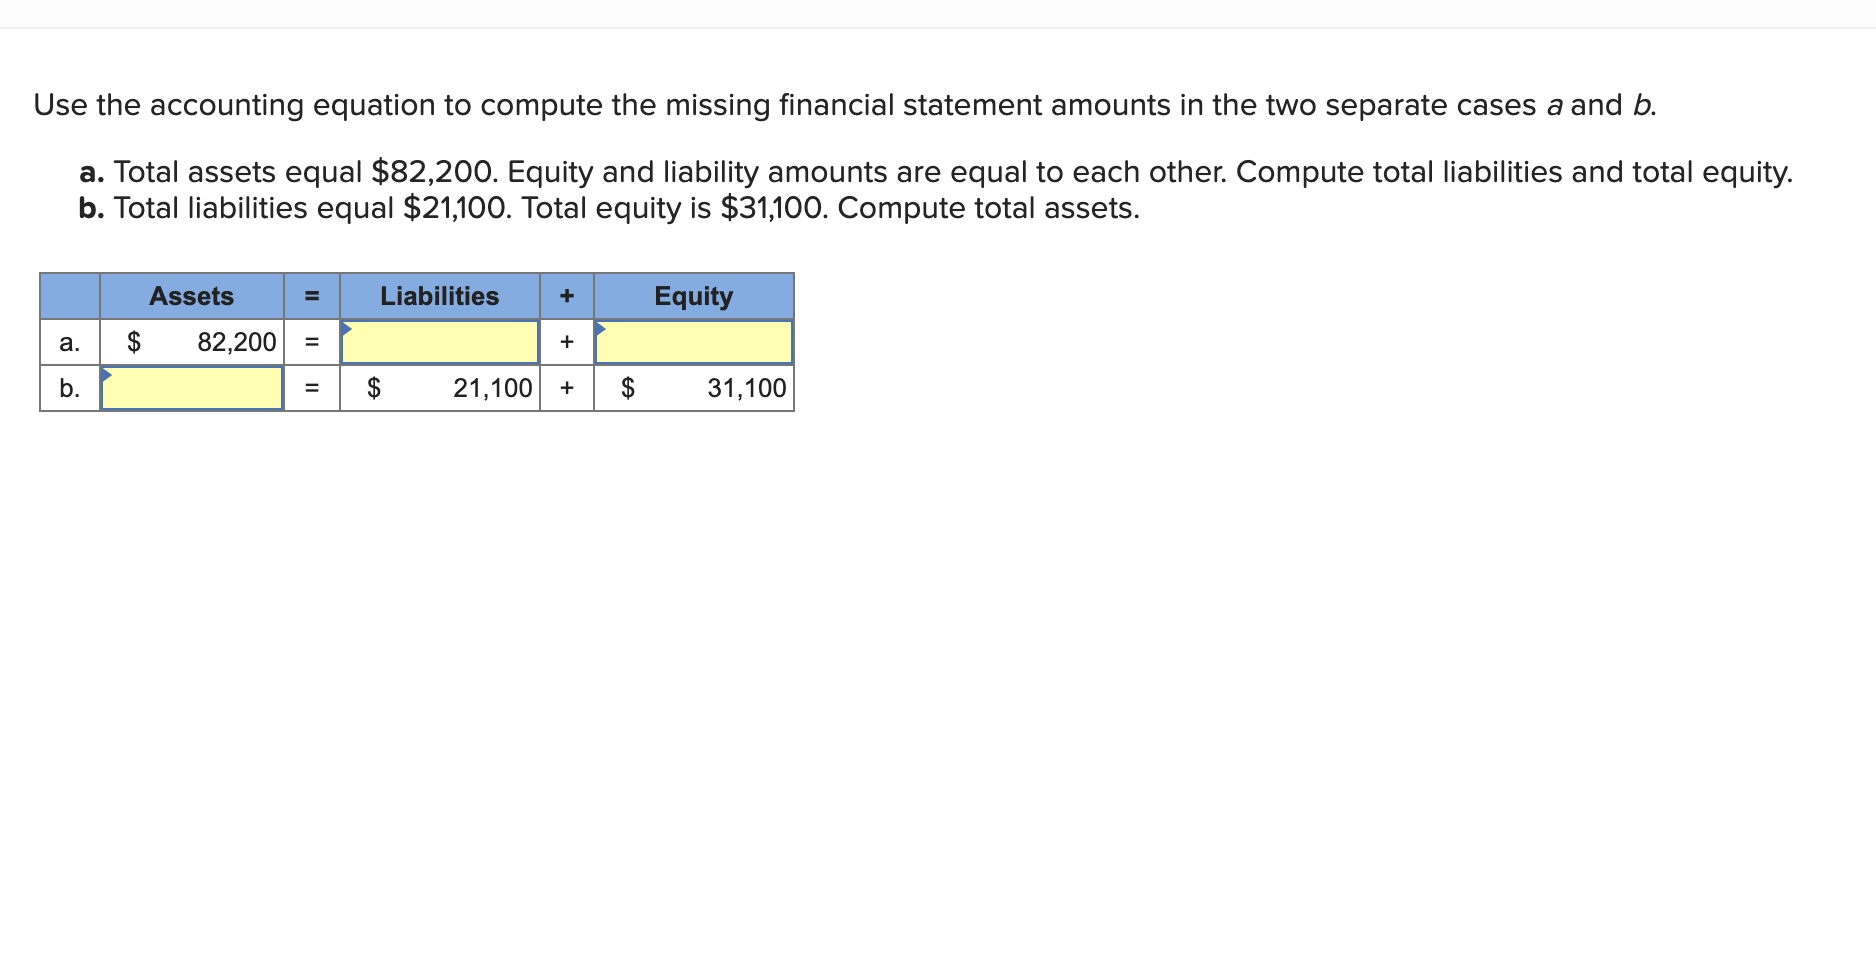 Use the accounting equation to compute the missing financial statement amounts in the two separate cases a